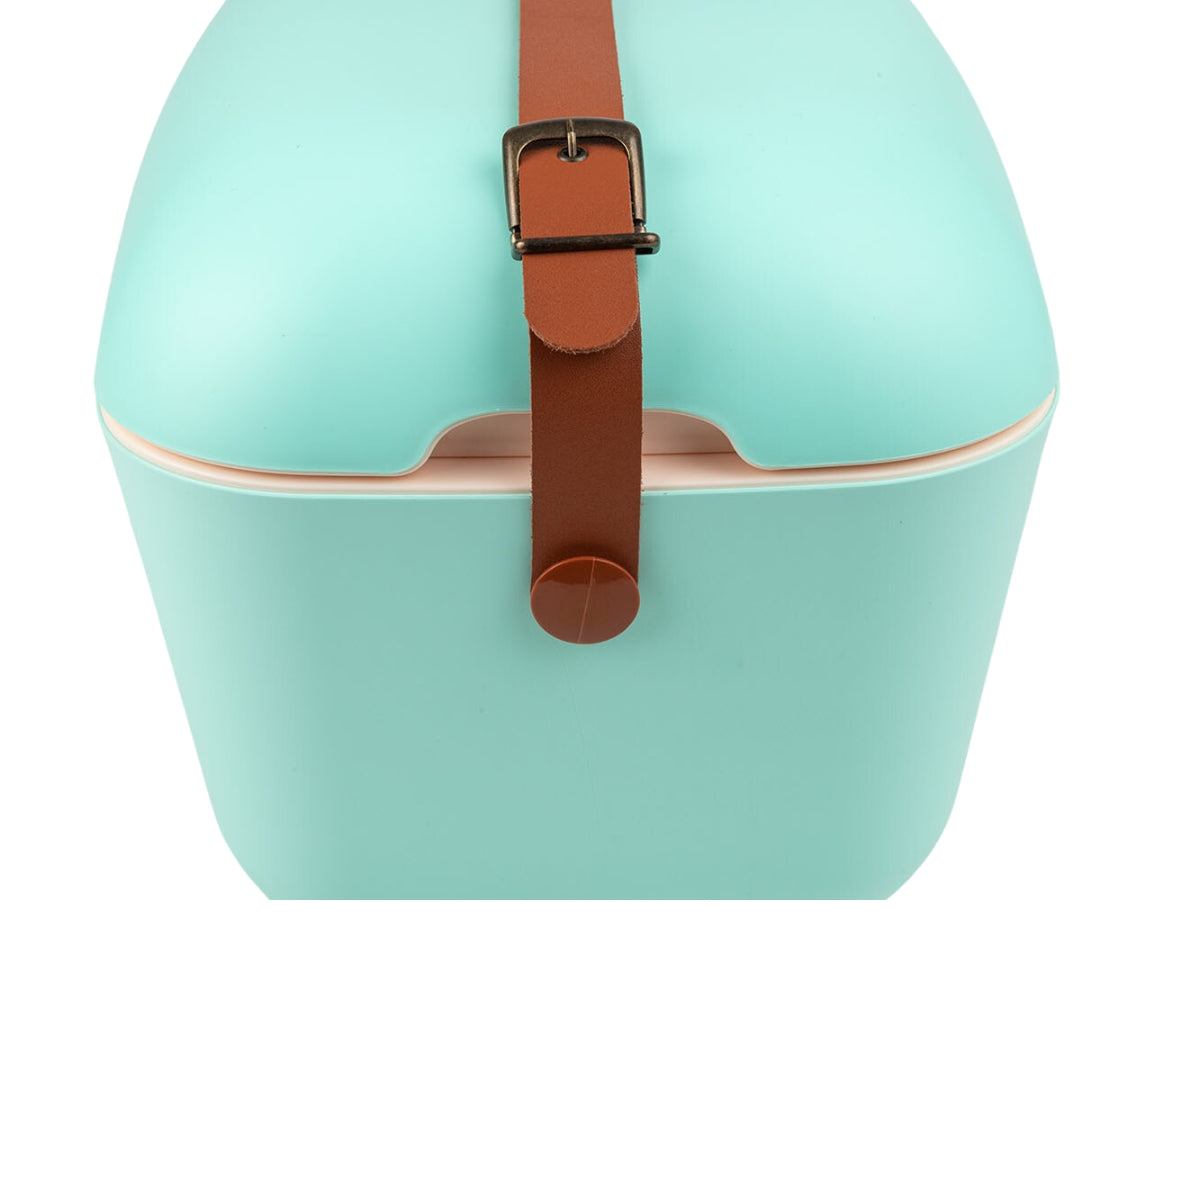 12 Liters Classic Cooler Box Cyan /Baby Rose - Polarbox